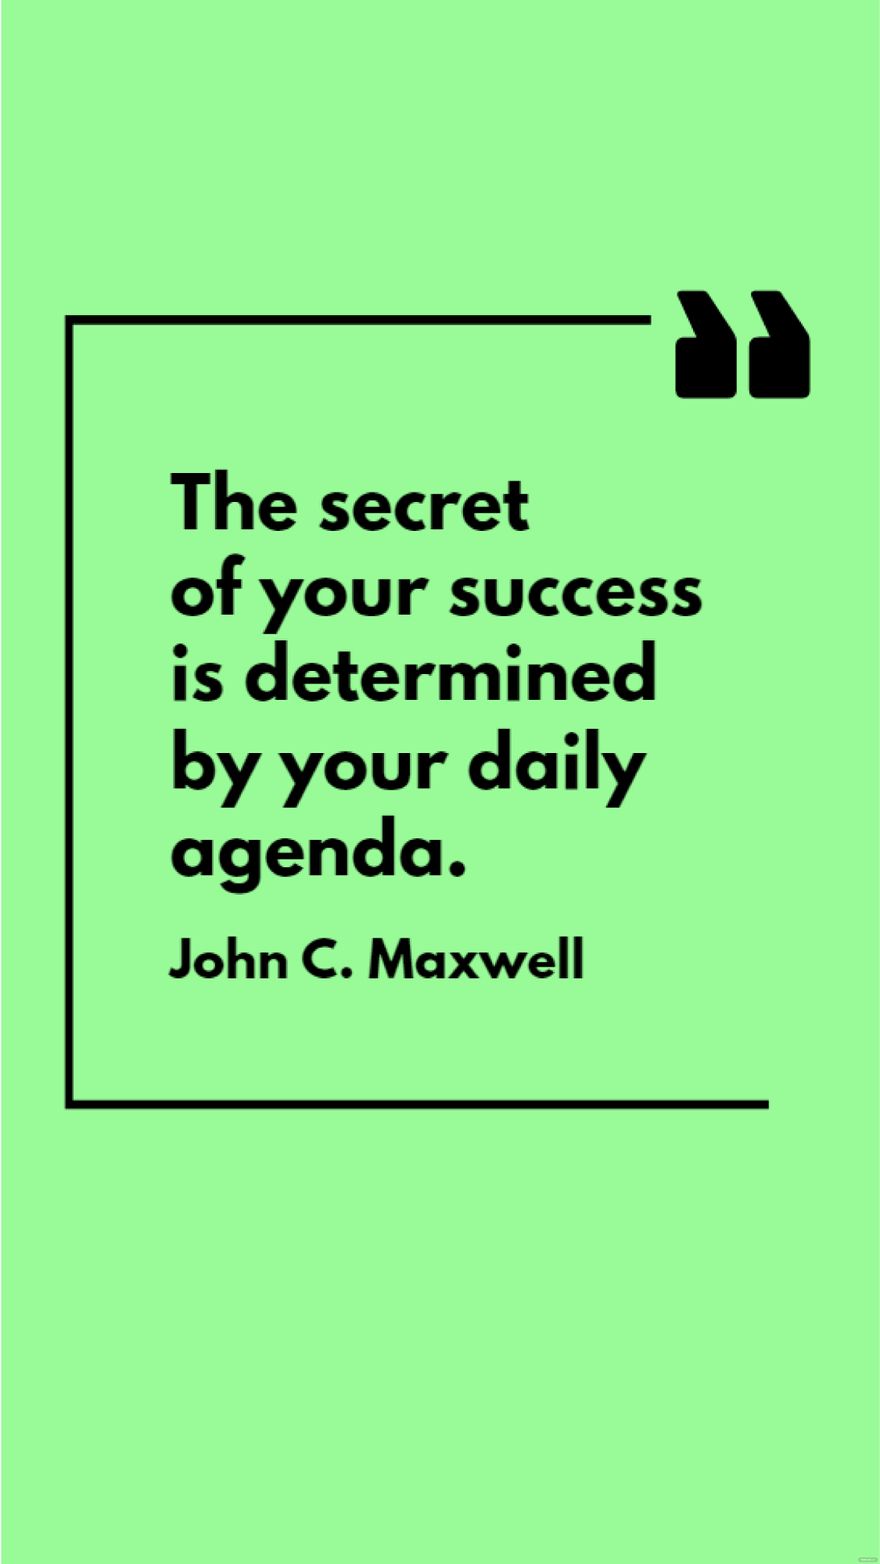 Free John C. Maxwell - The secret of your success is determined by your daily agenda. in JPG